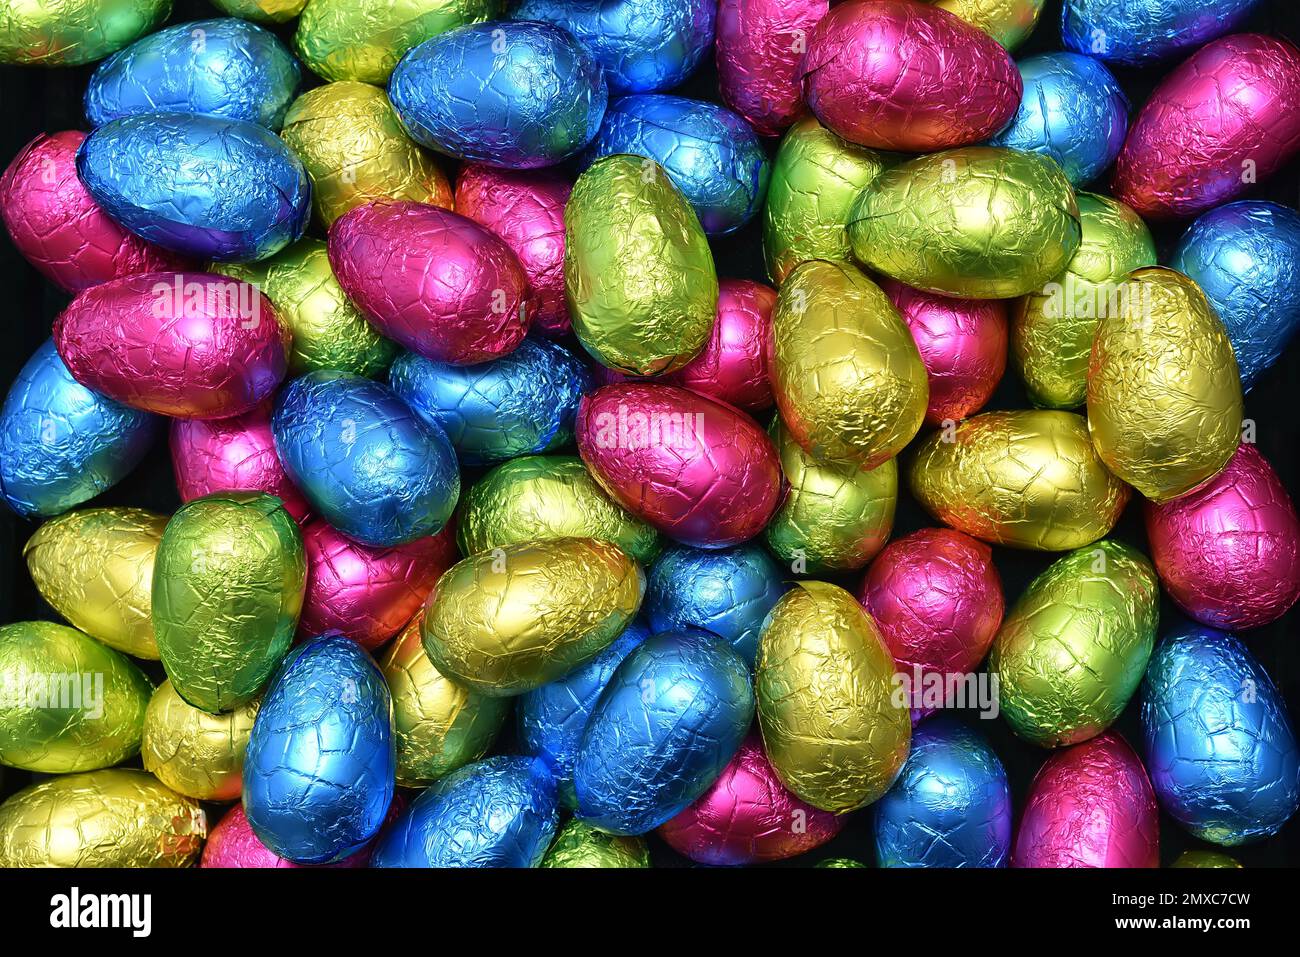 Pile or group of multi colored colourful foil wrapped chocolate easter eggs in pink, blue, yellow and lime green. Stock Photo